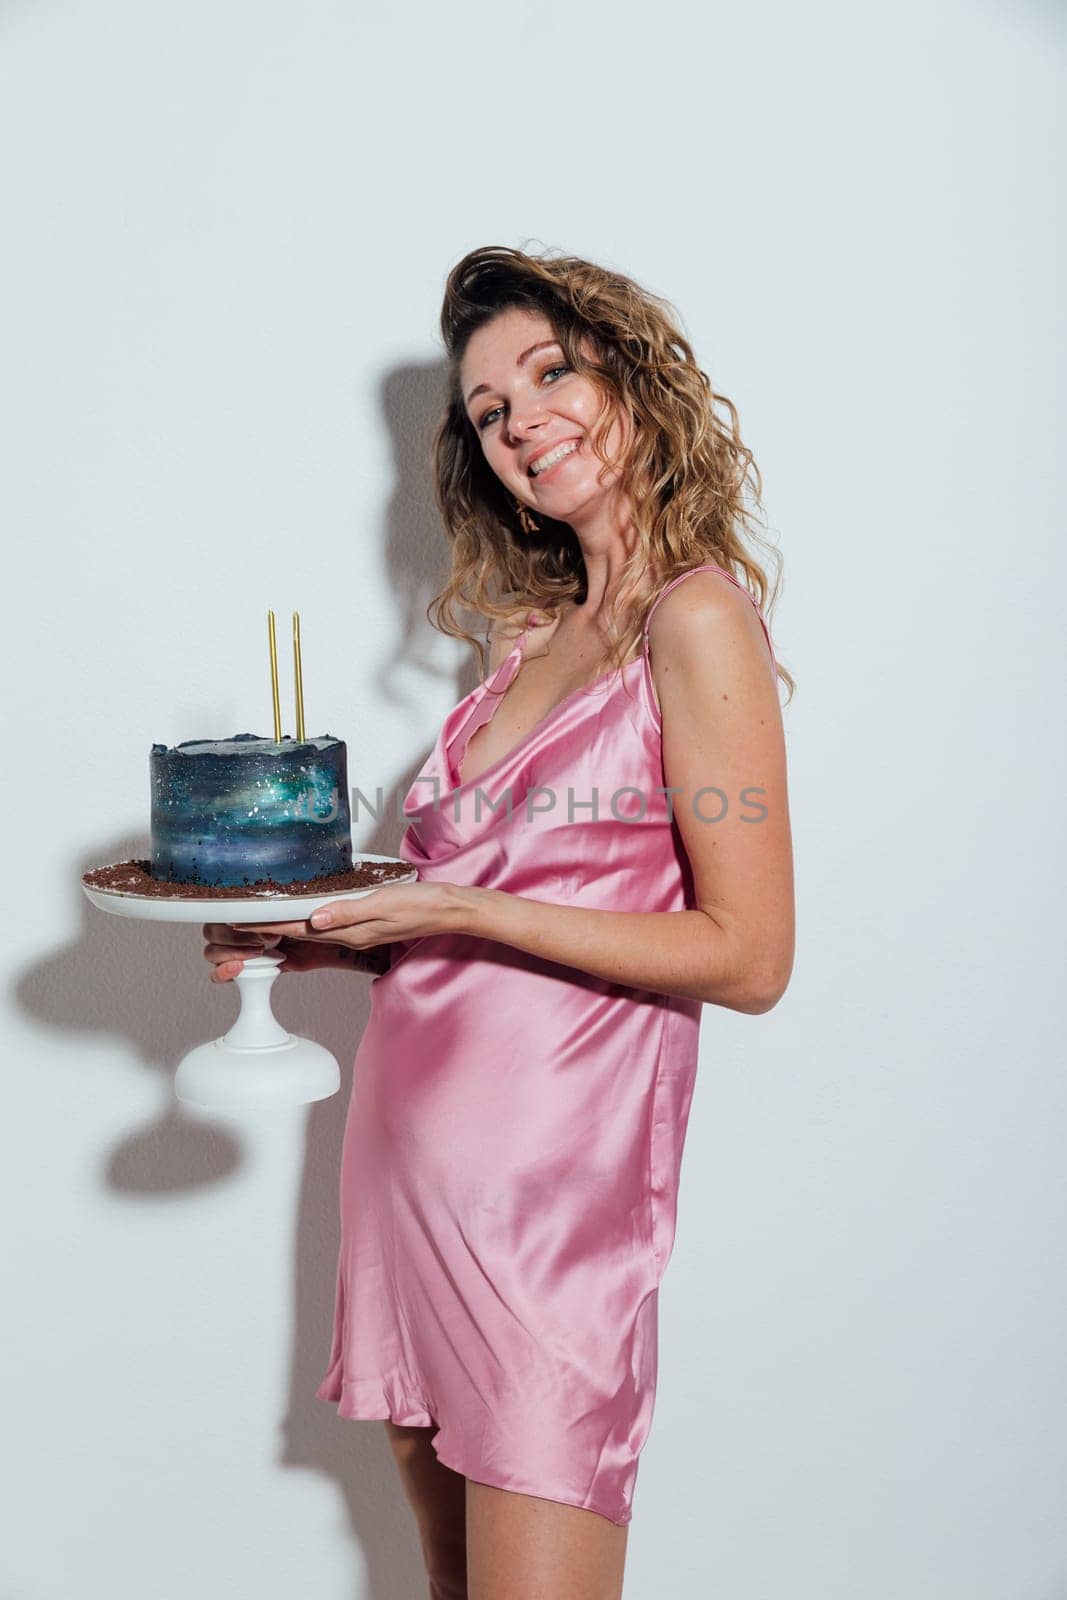 a woman in an elegant pink dress stands in a stone with a cake